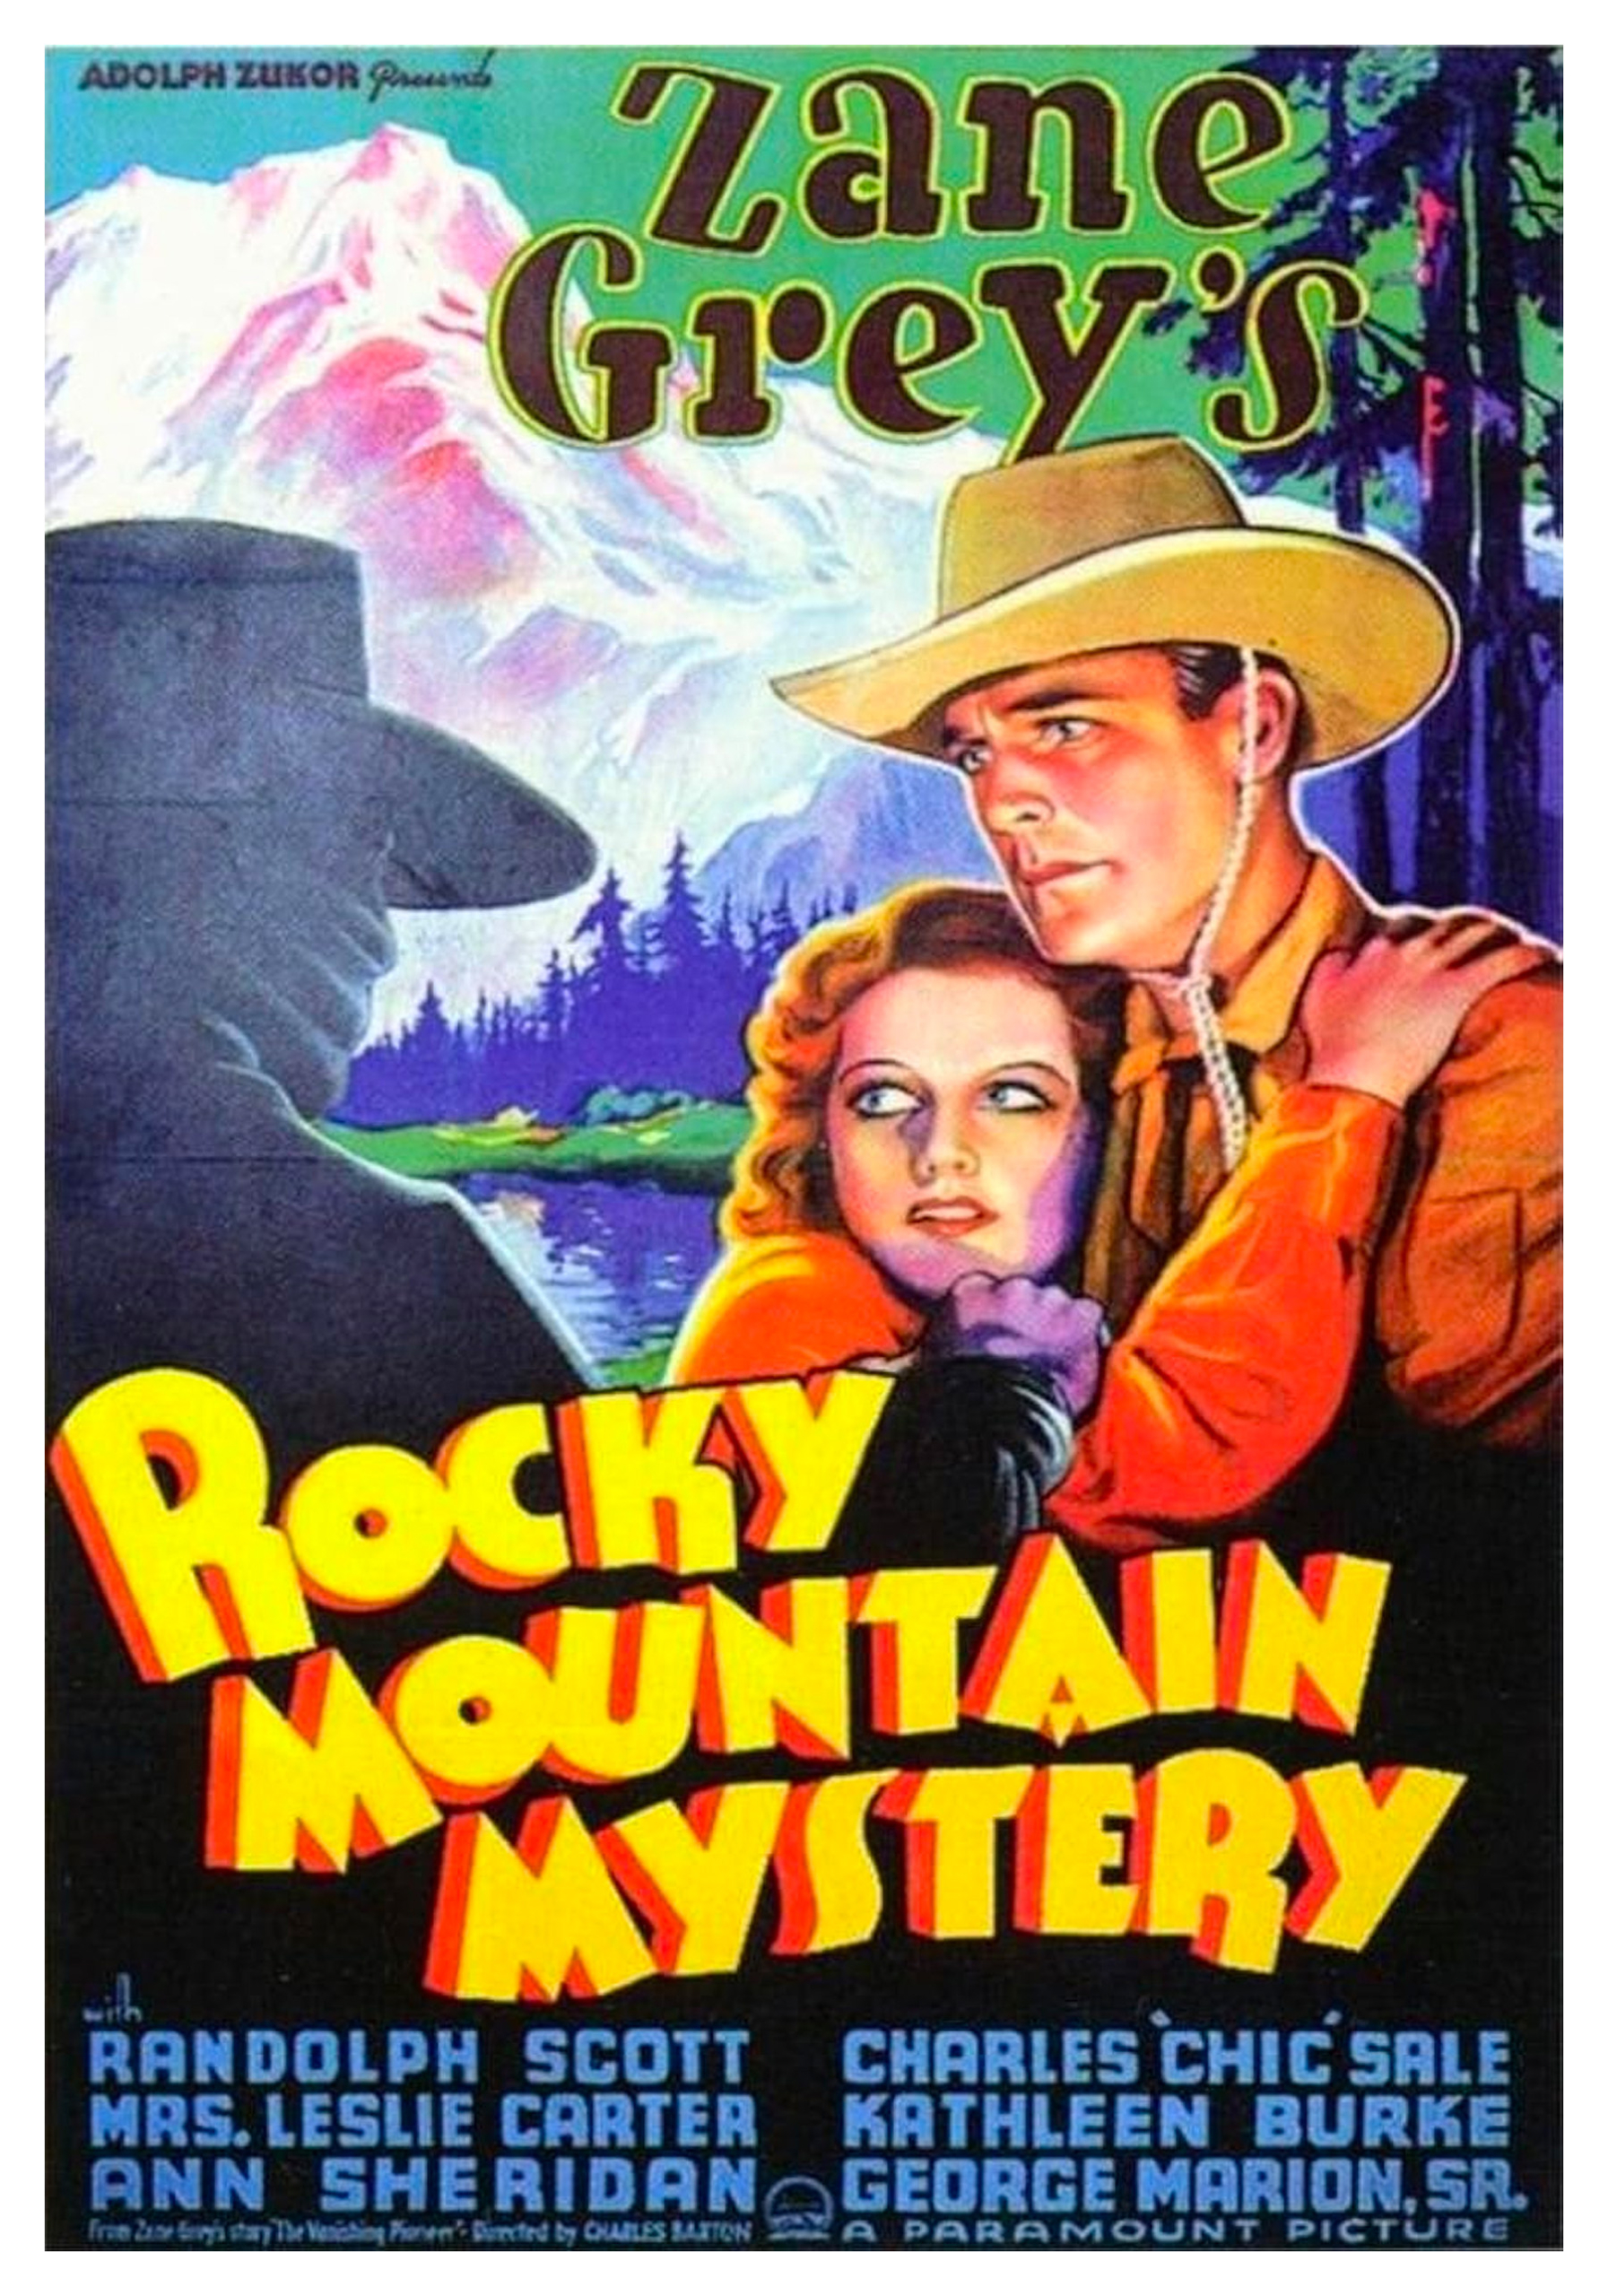 The Fighting Westerner/Rocky Mountain Mystery